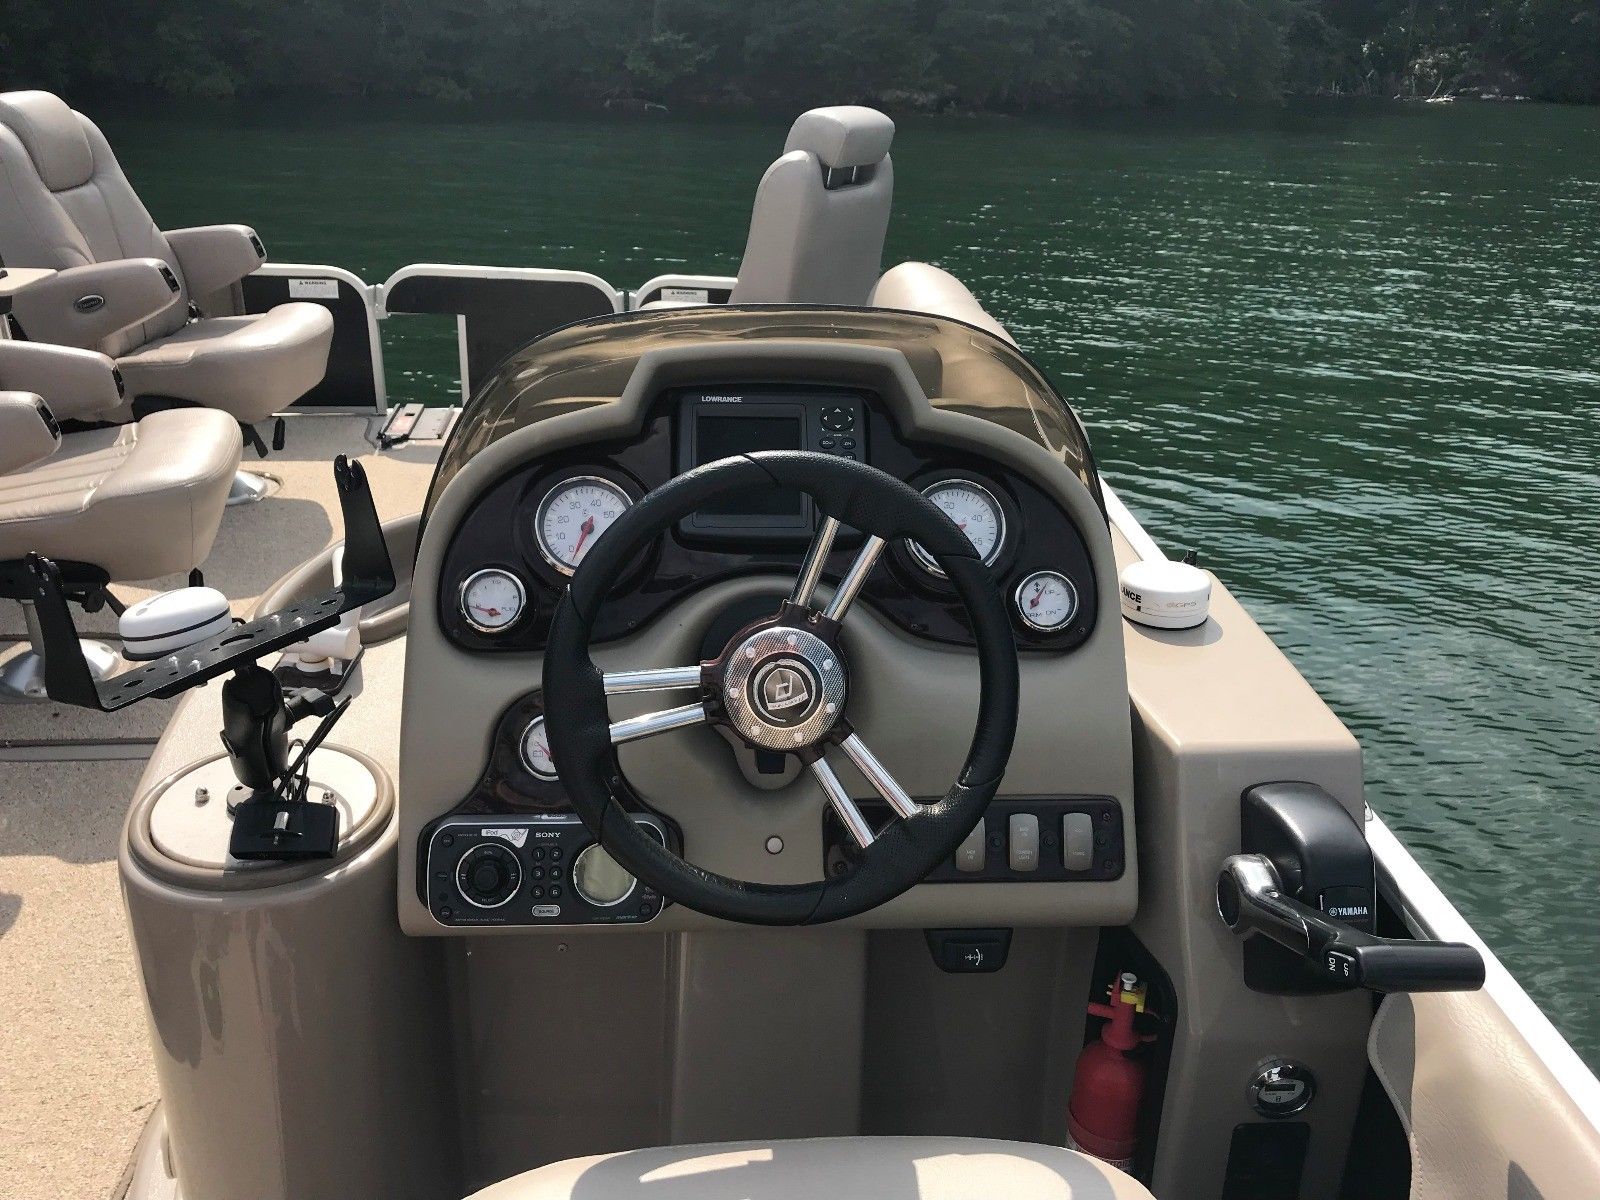 Premier 2009 for sale for $40,500 - Boats-from-USA.com